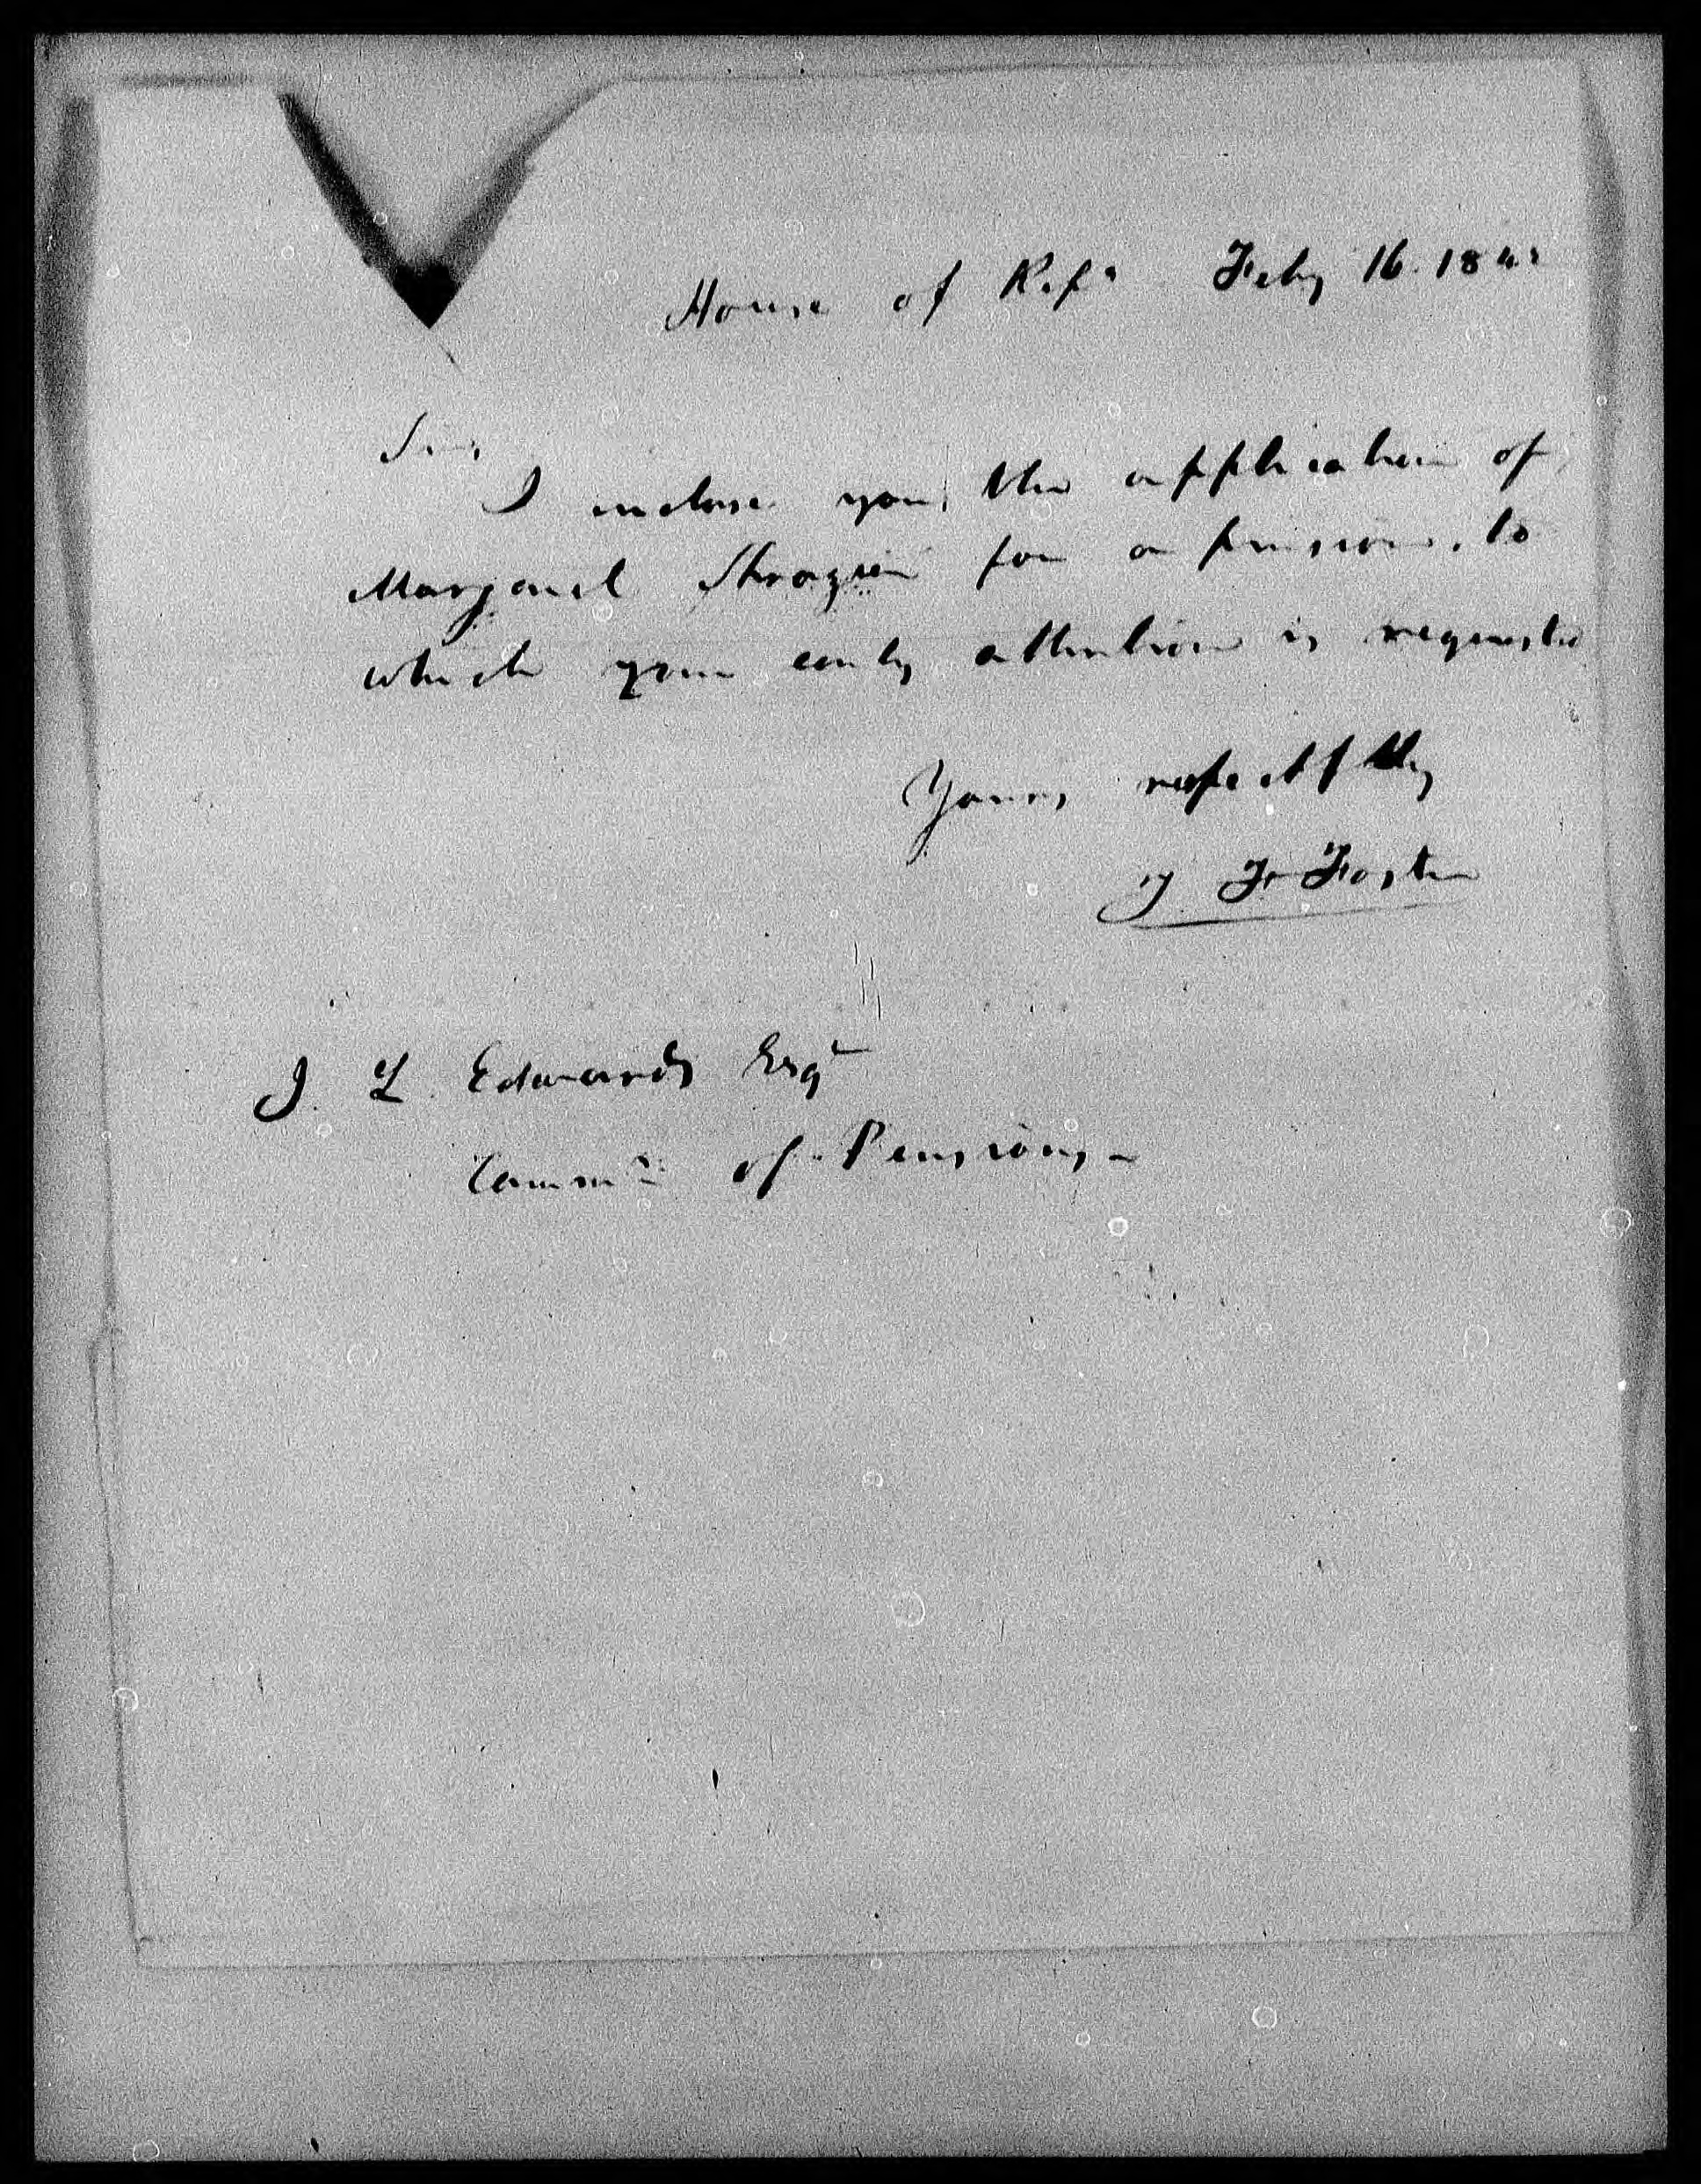 Letter from T. F. Foster to James L. Edwards, 16 February 1842